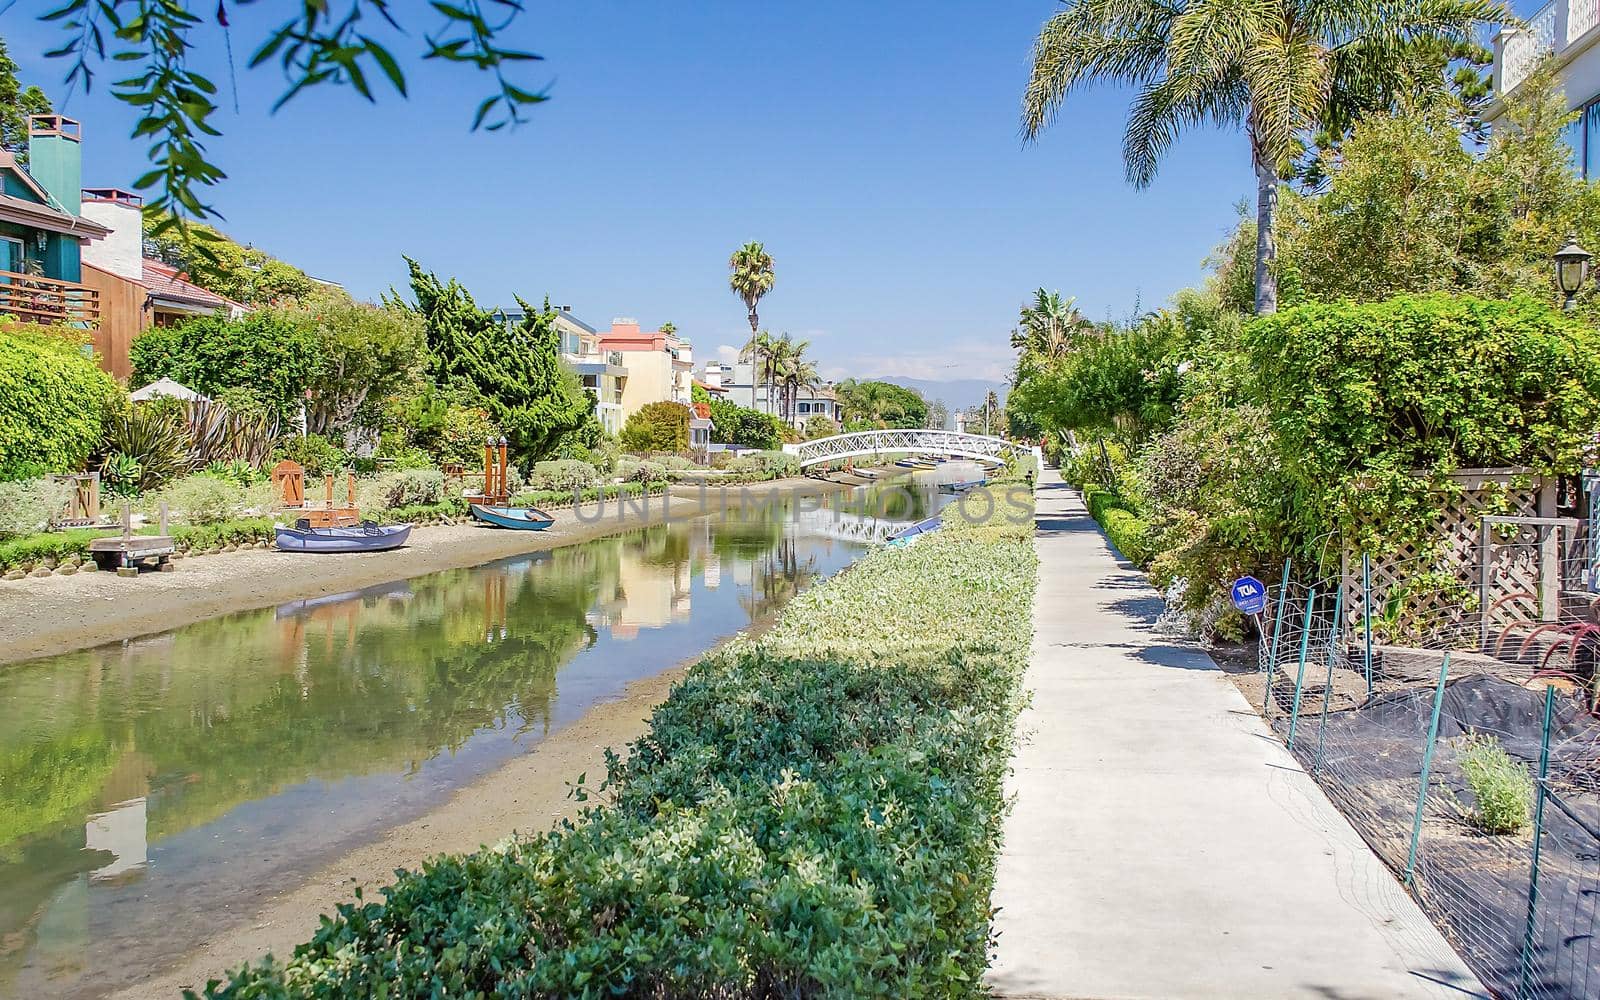 Residential area with canals in Venice Beach, Los Angeles, California